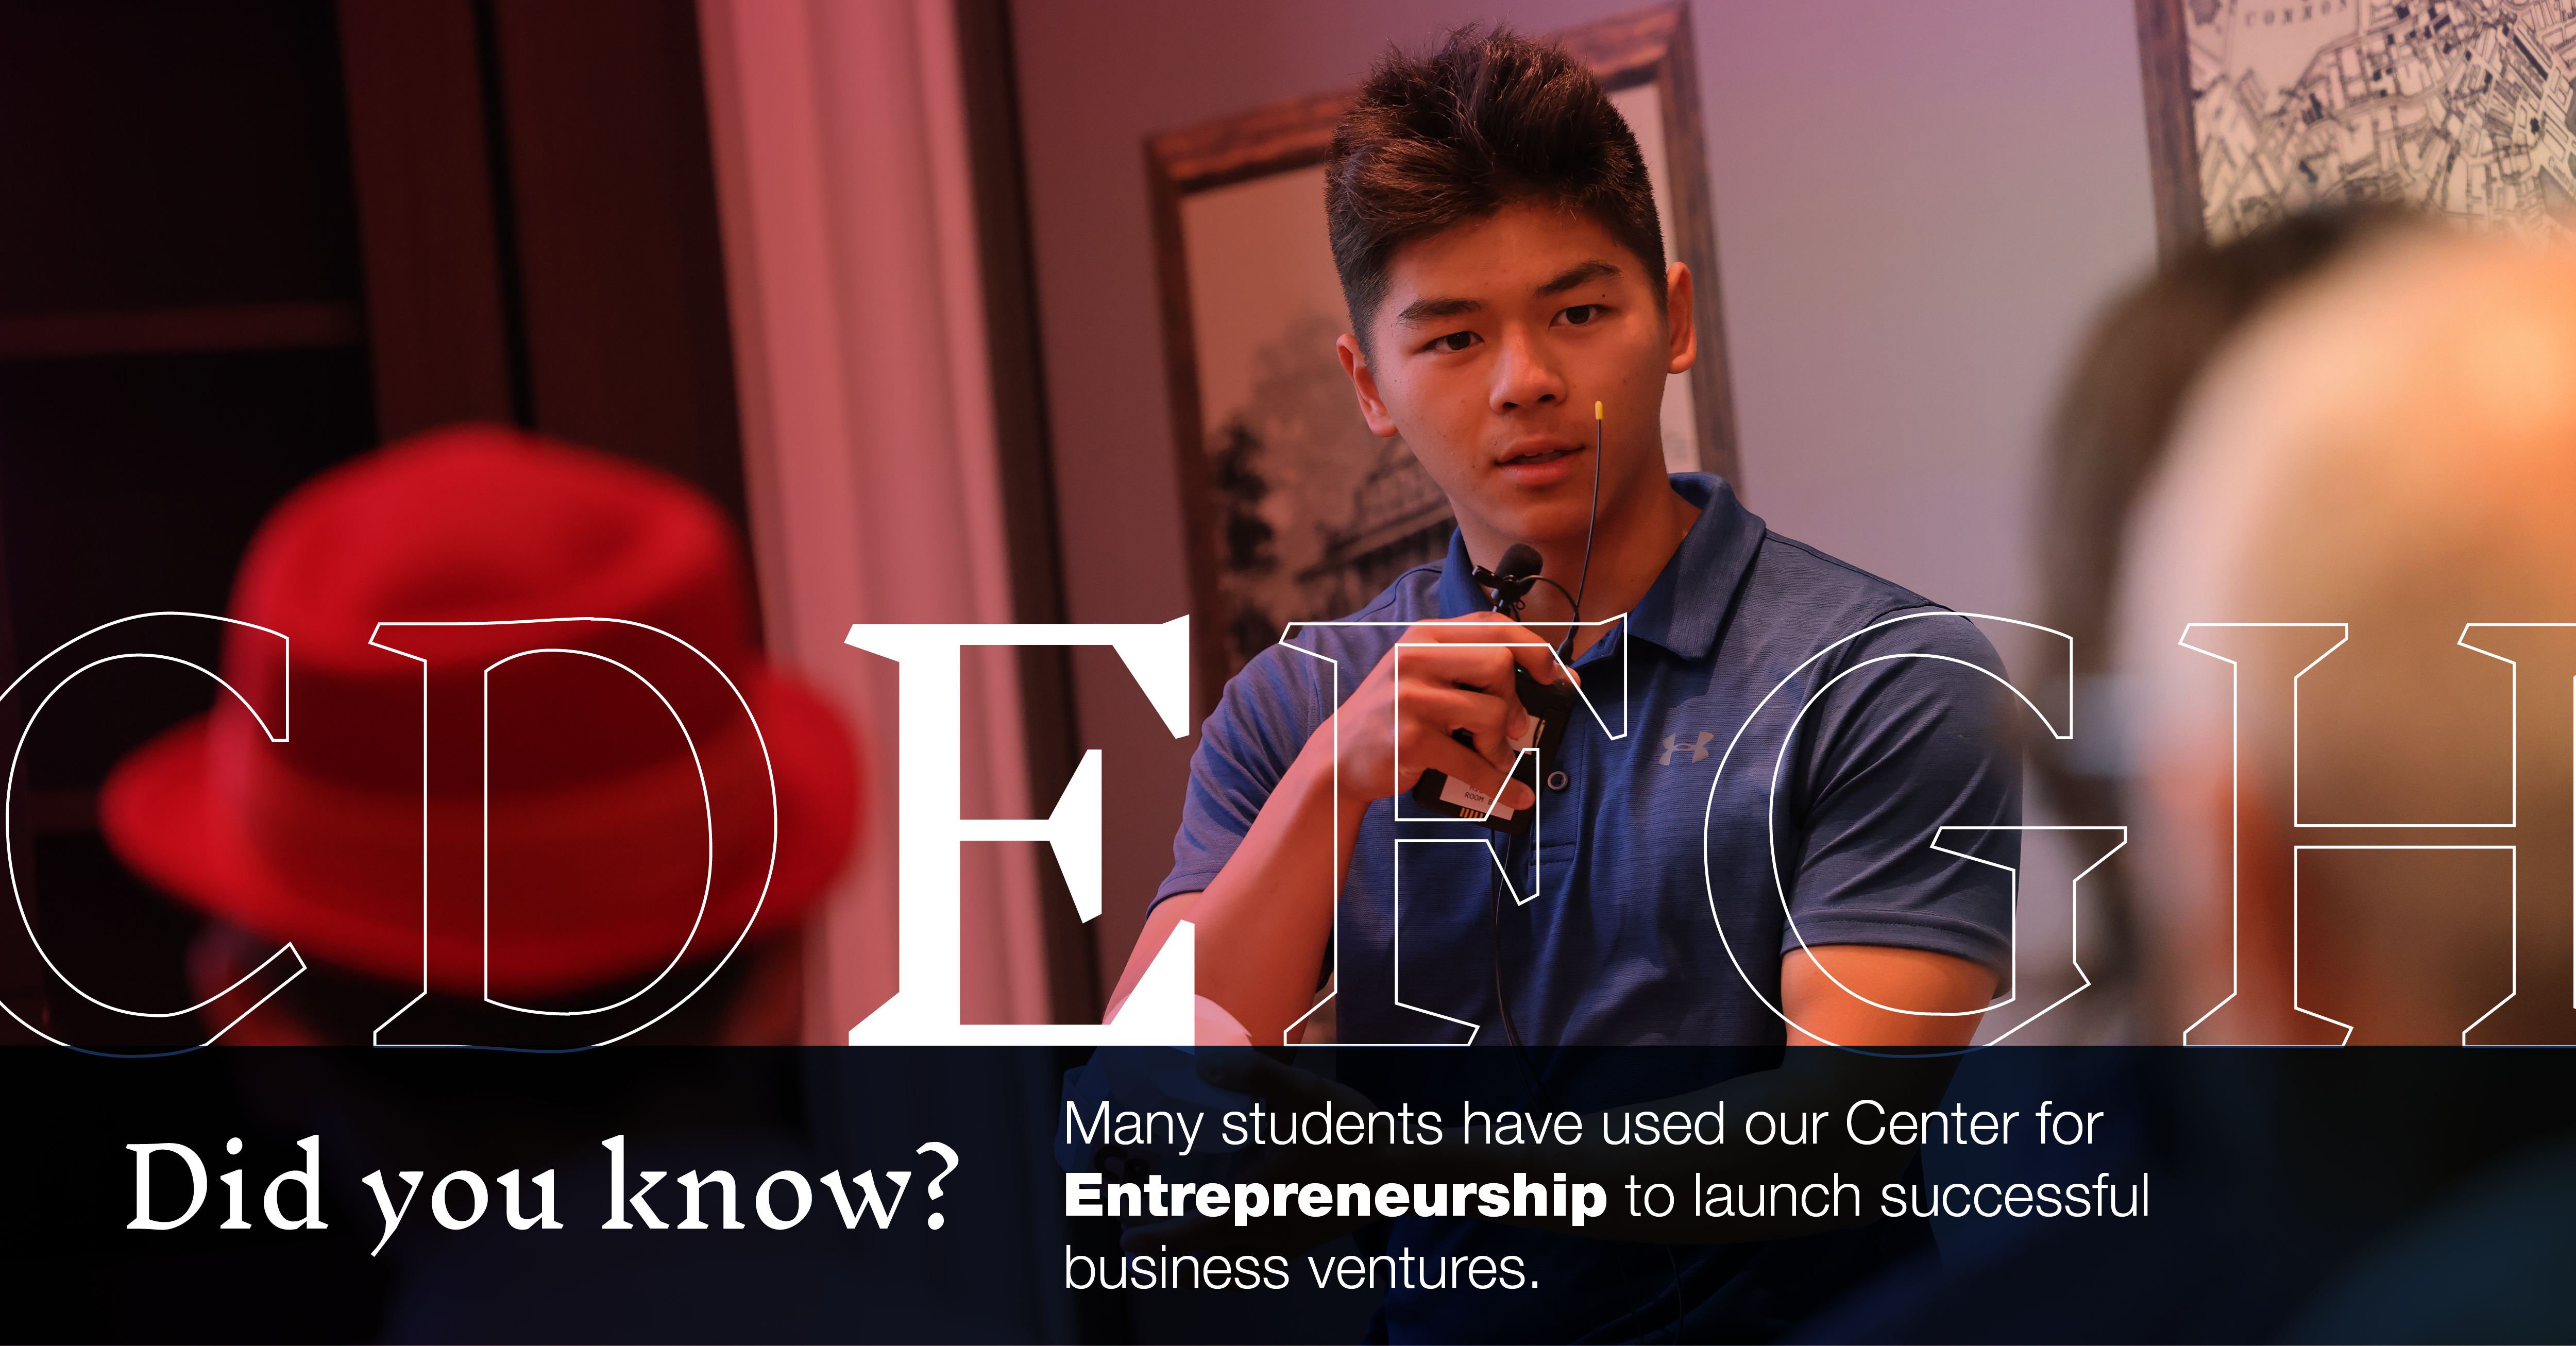 Image of student speaking to a group of fellow entrepreneurs: "Did you know many students have used our Center for Entrepreneurship to launch successful business ventures?"